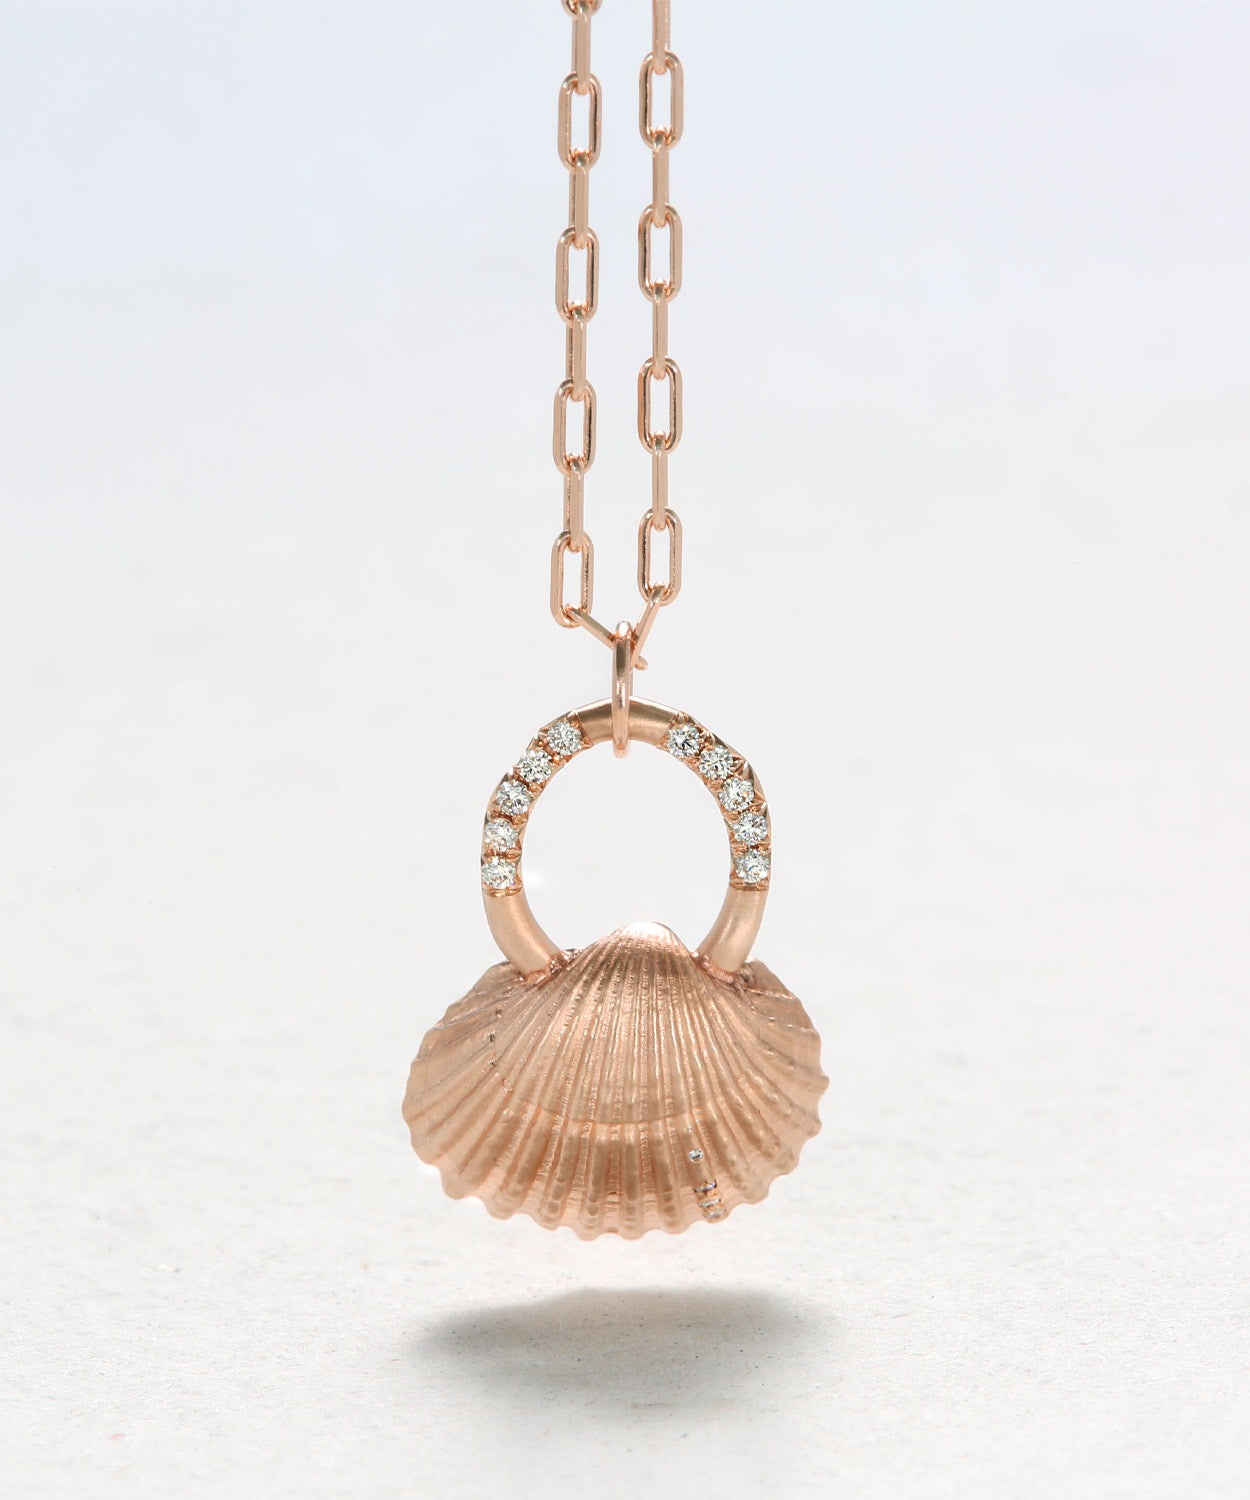 Of Shells and Sea Necklace